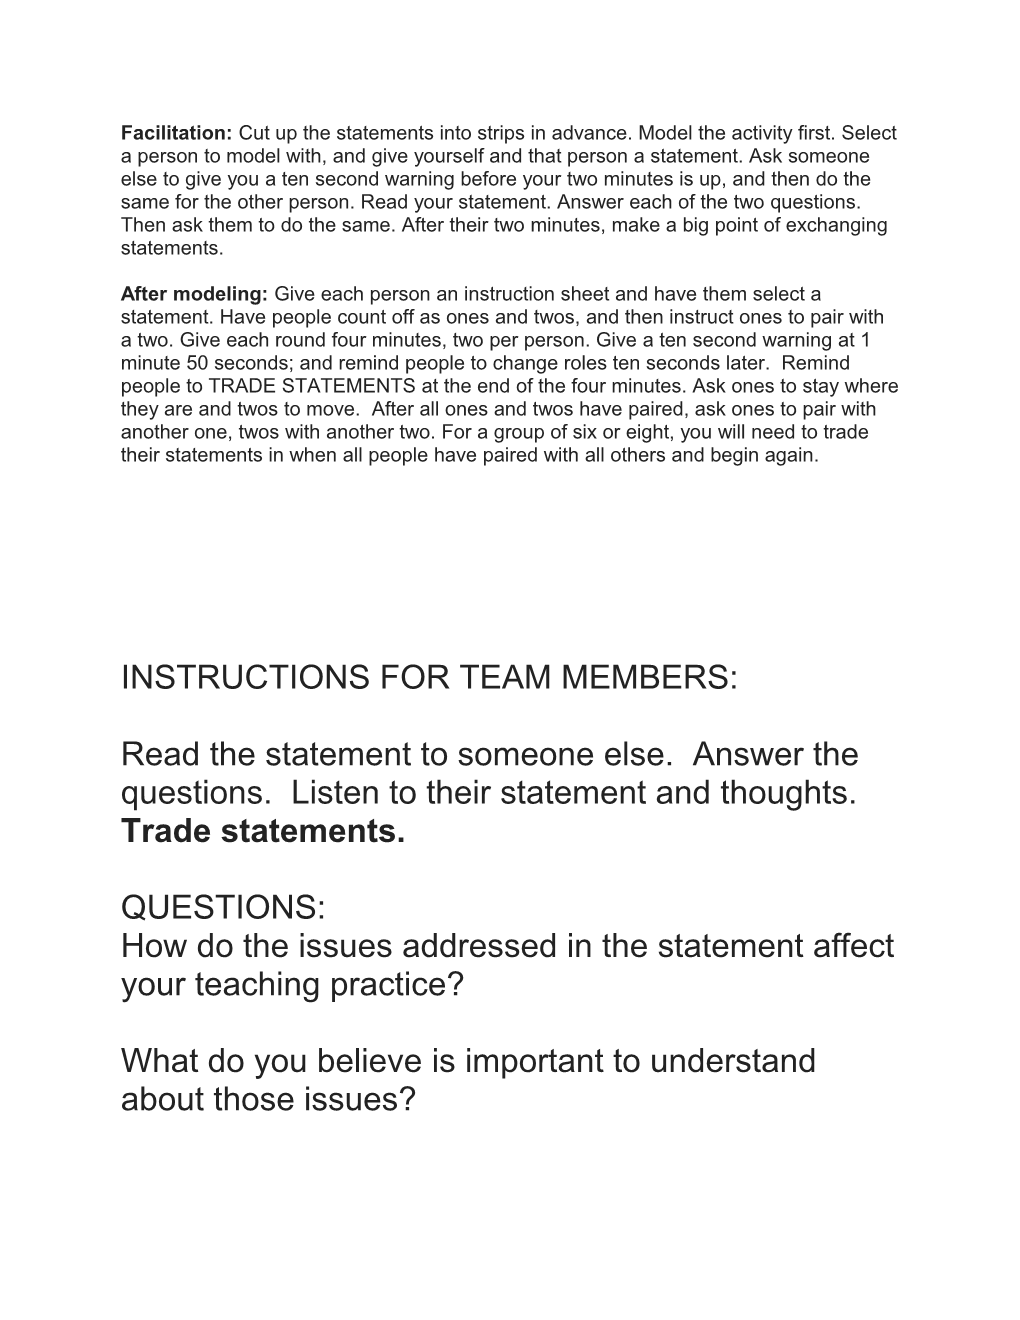 Instructions for Team Members